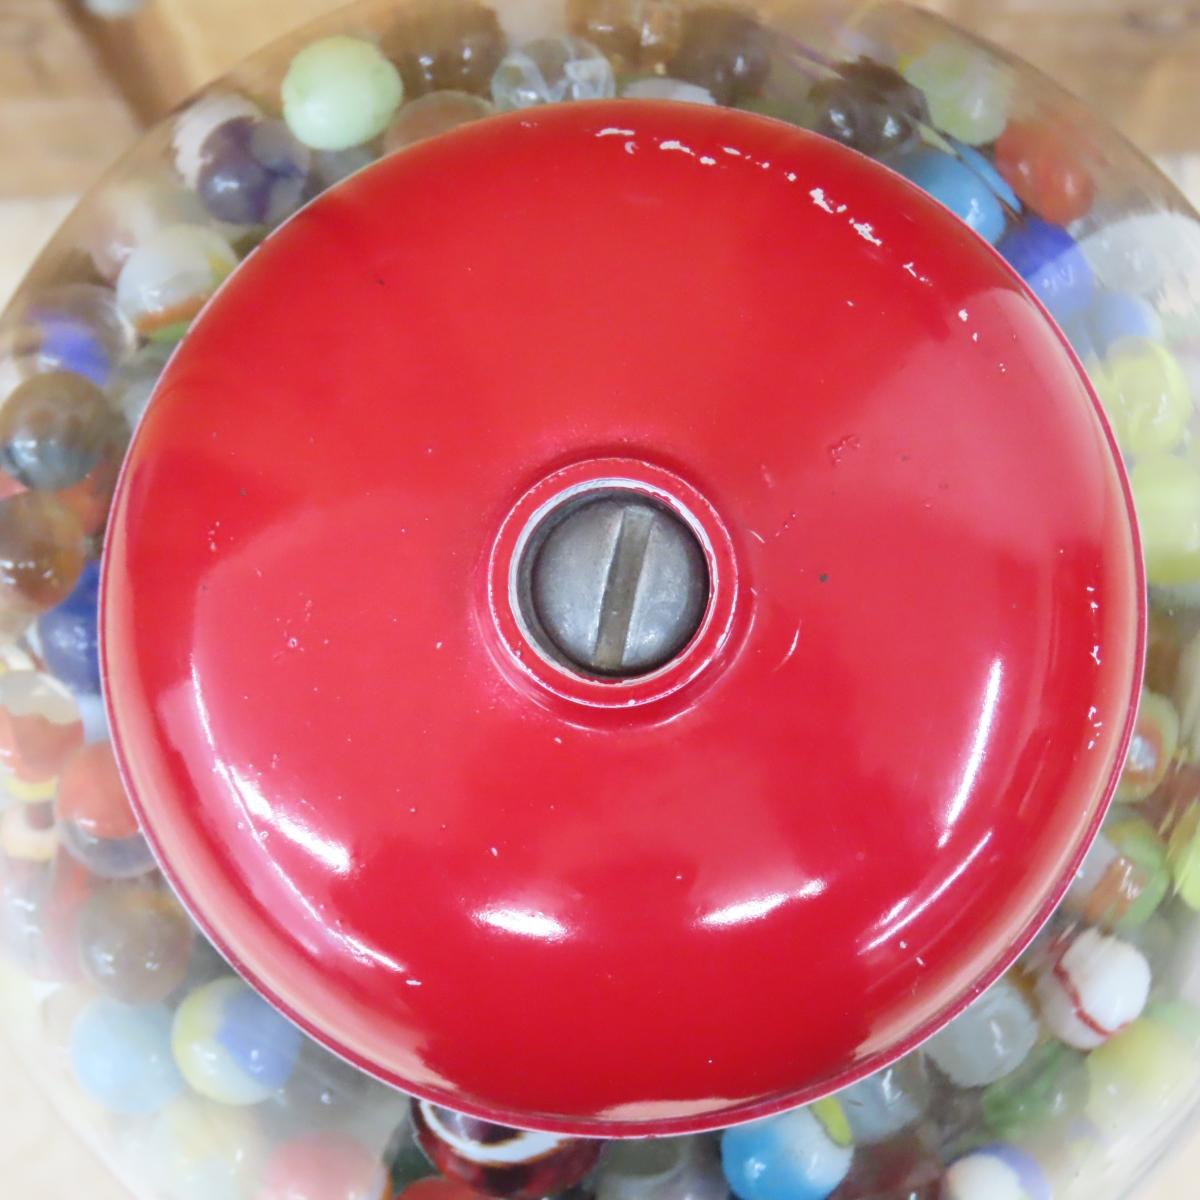 Vintage Gumball Machine Full of Marbles